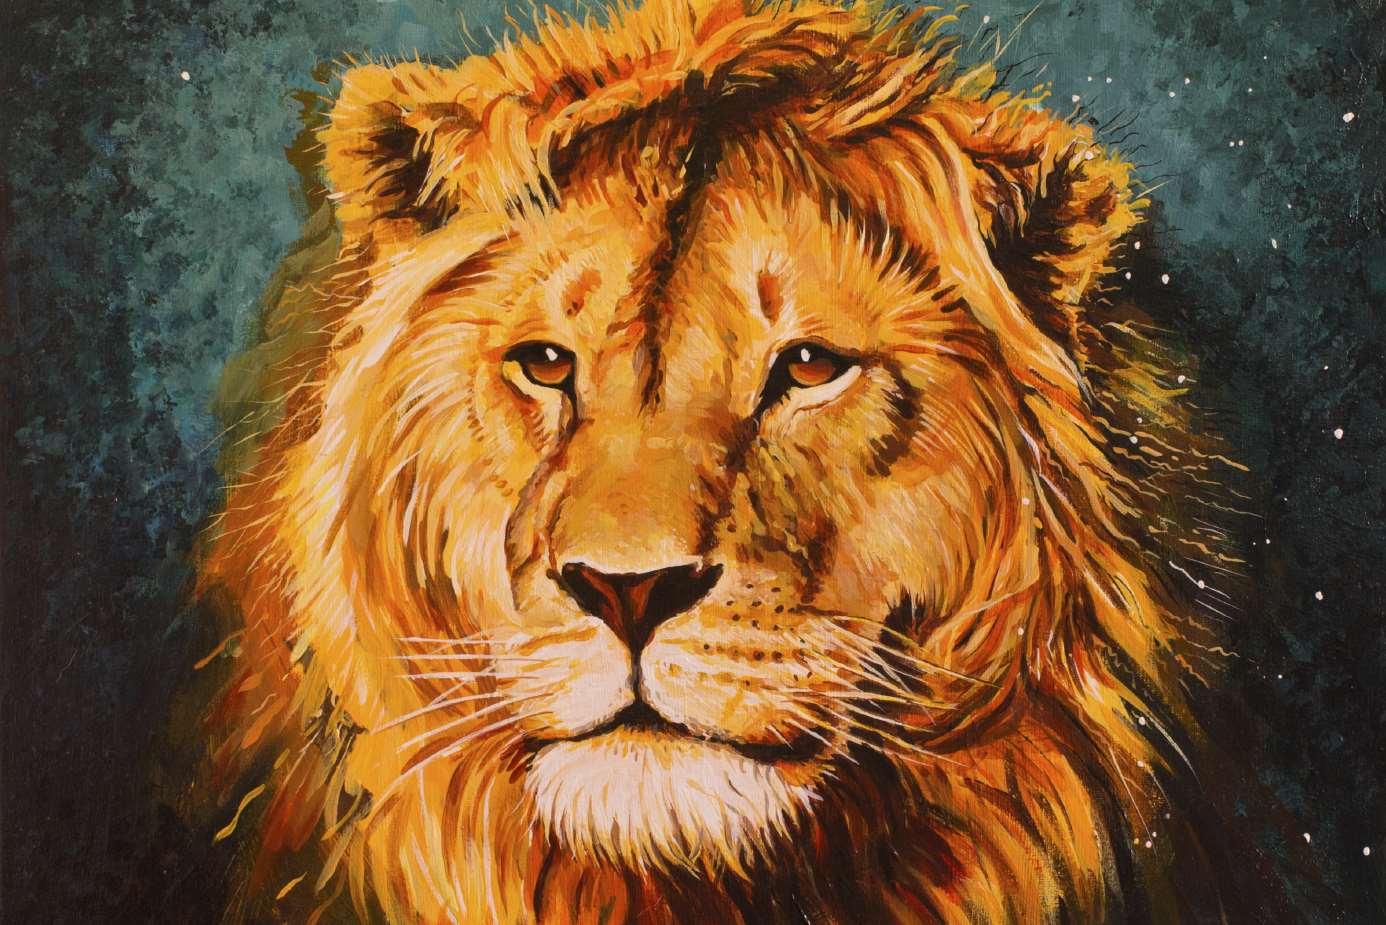 The Narnia lion, Aslan, from The Lion, The Witch and The Wardrobe. iStock image